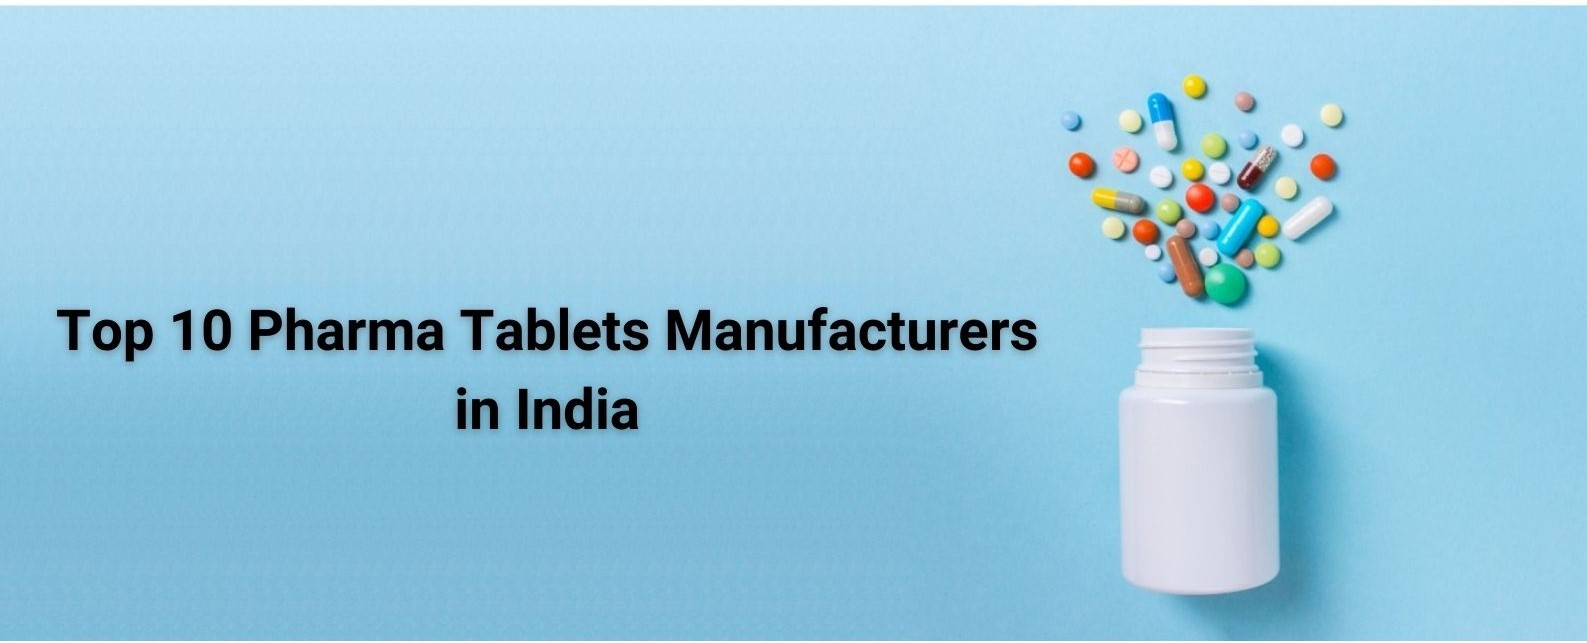 Top 10 Pharma Tablets Manufacturers in India